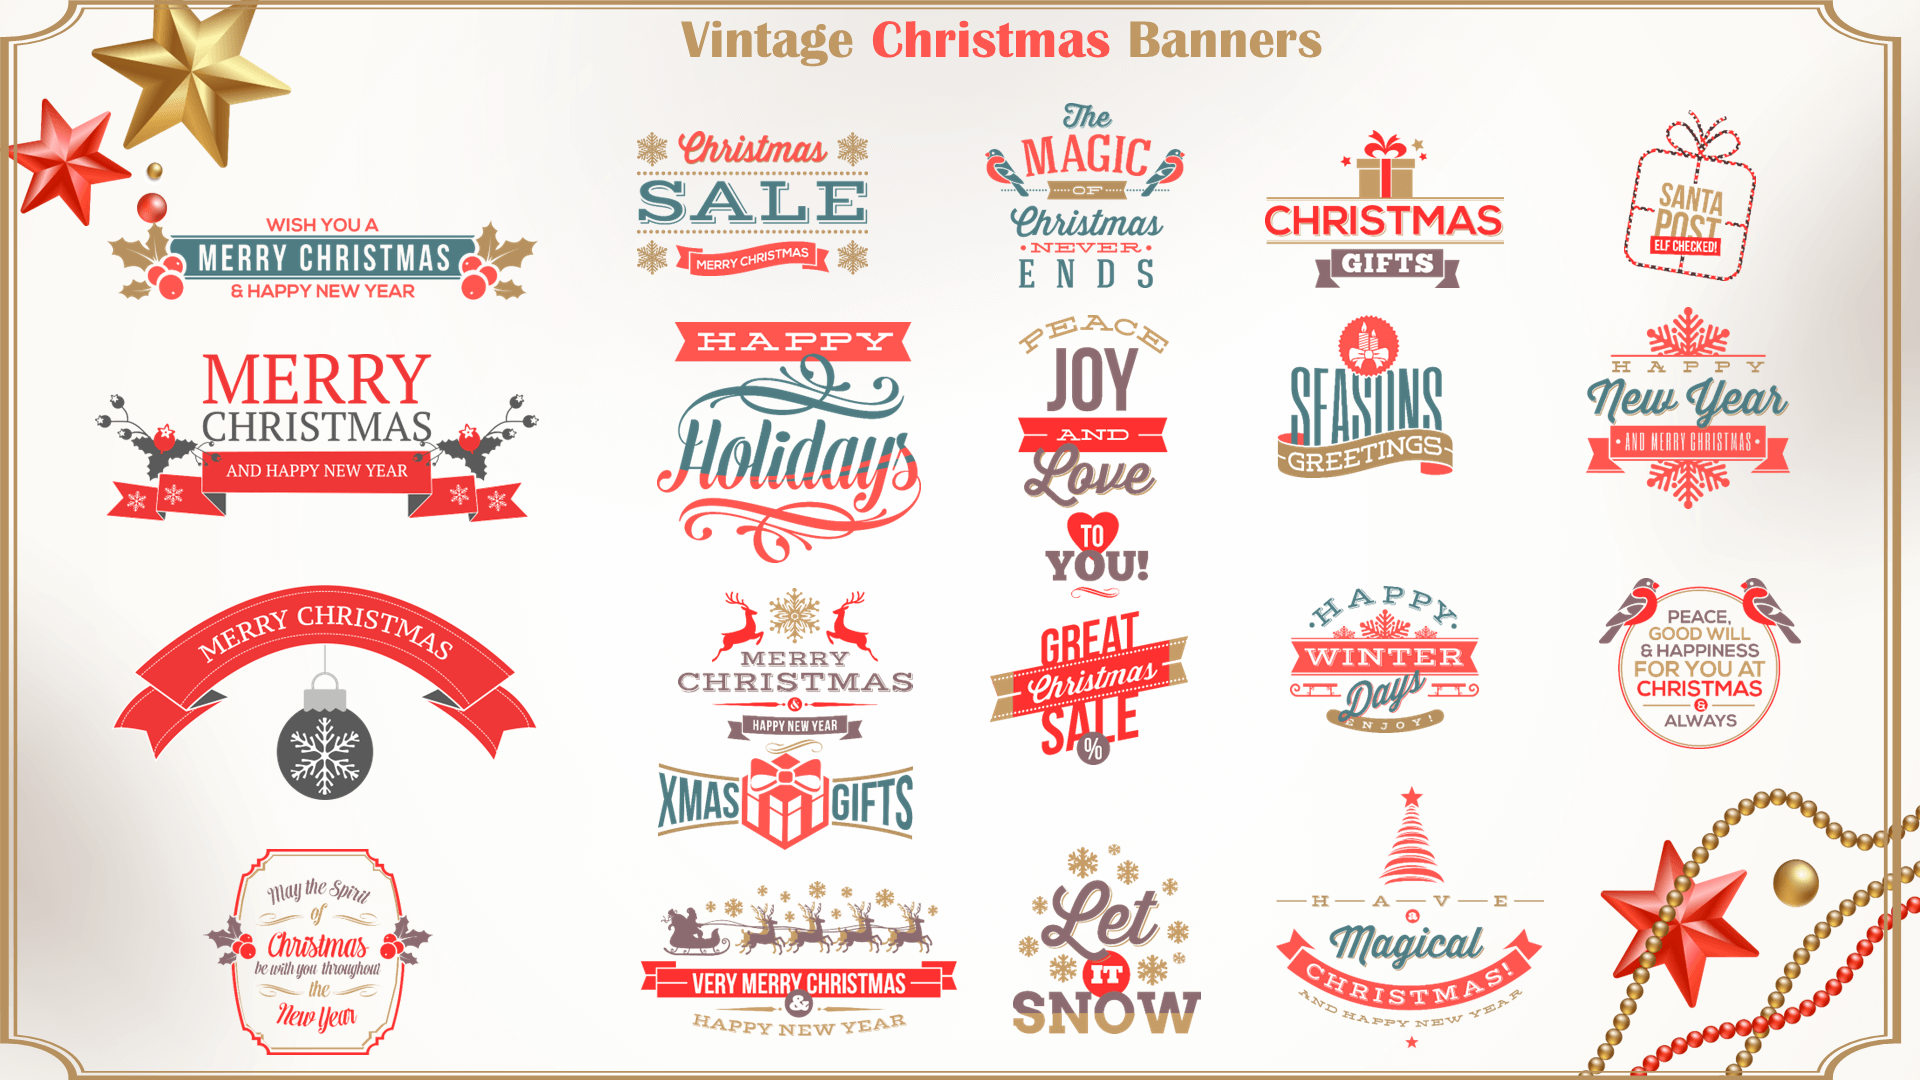 Vintage_banners1